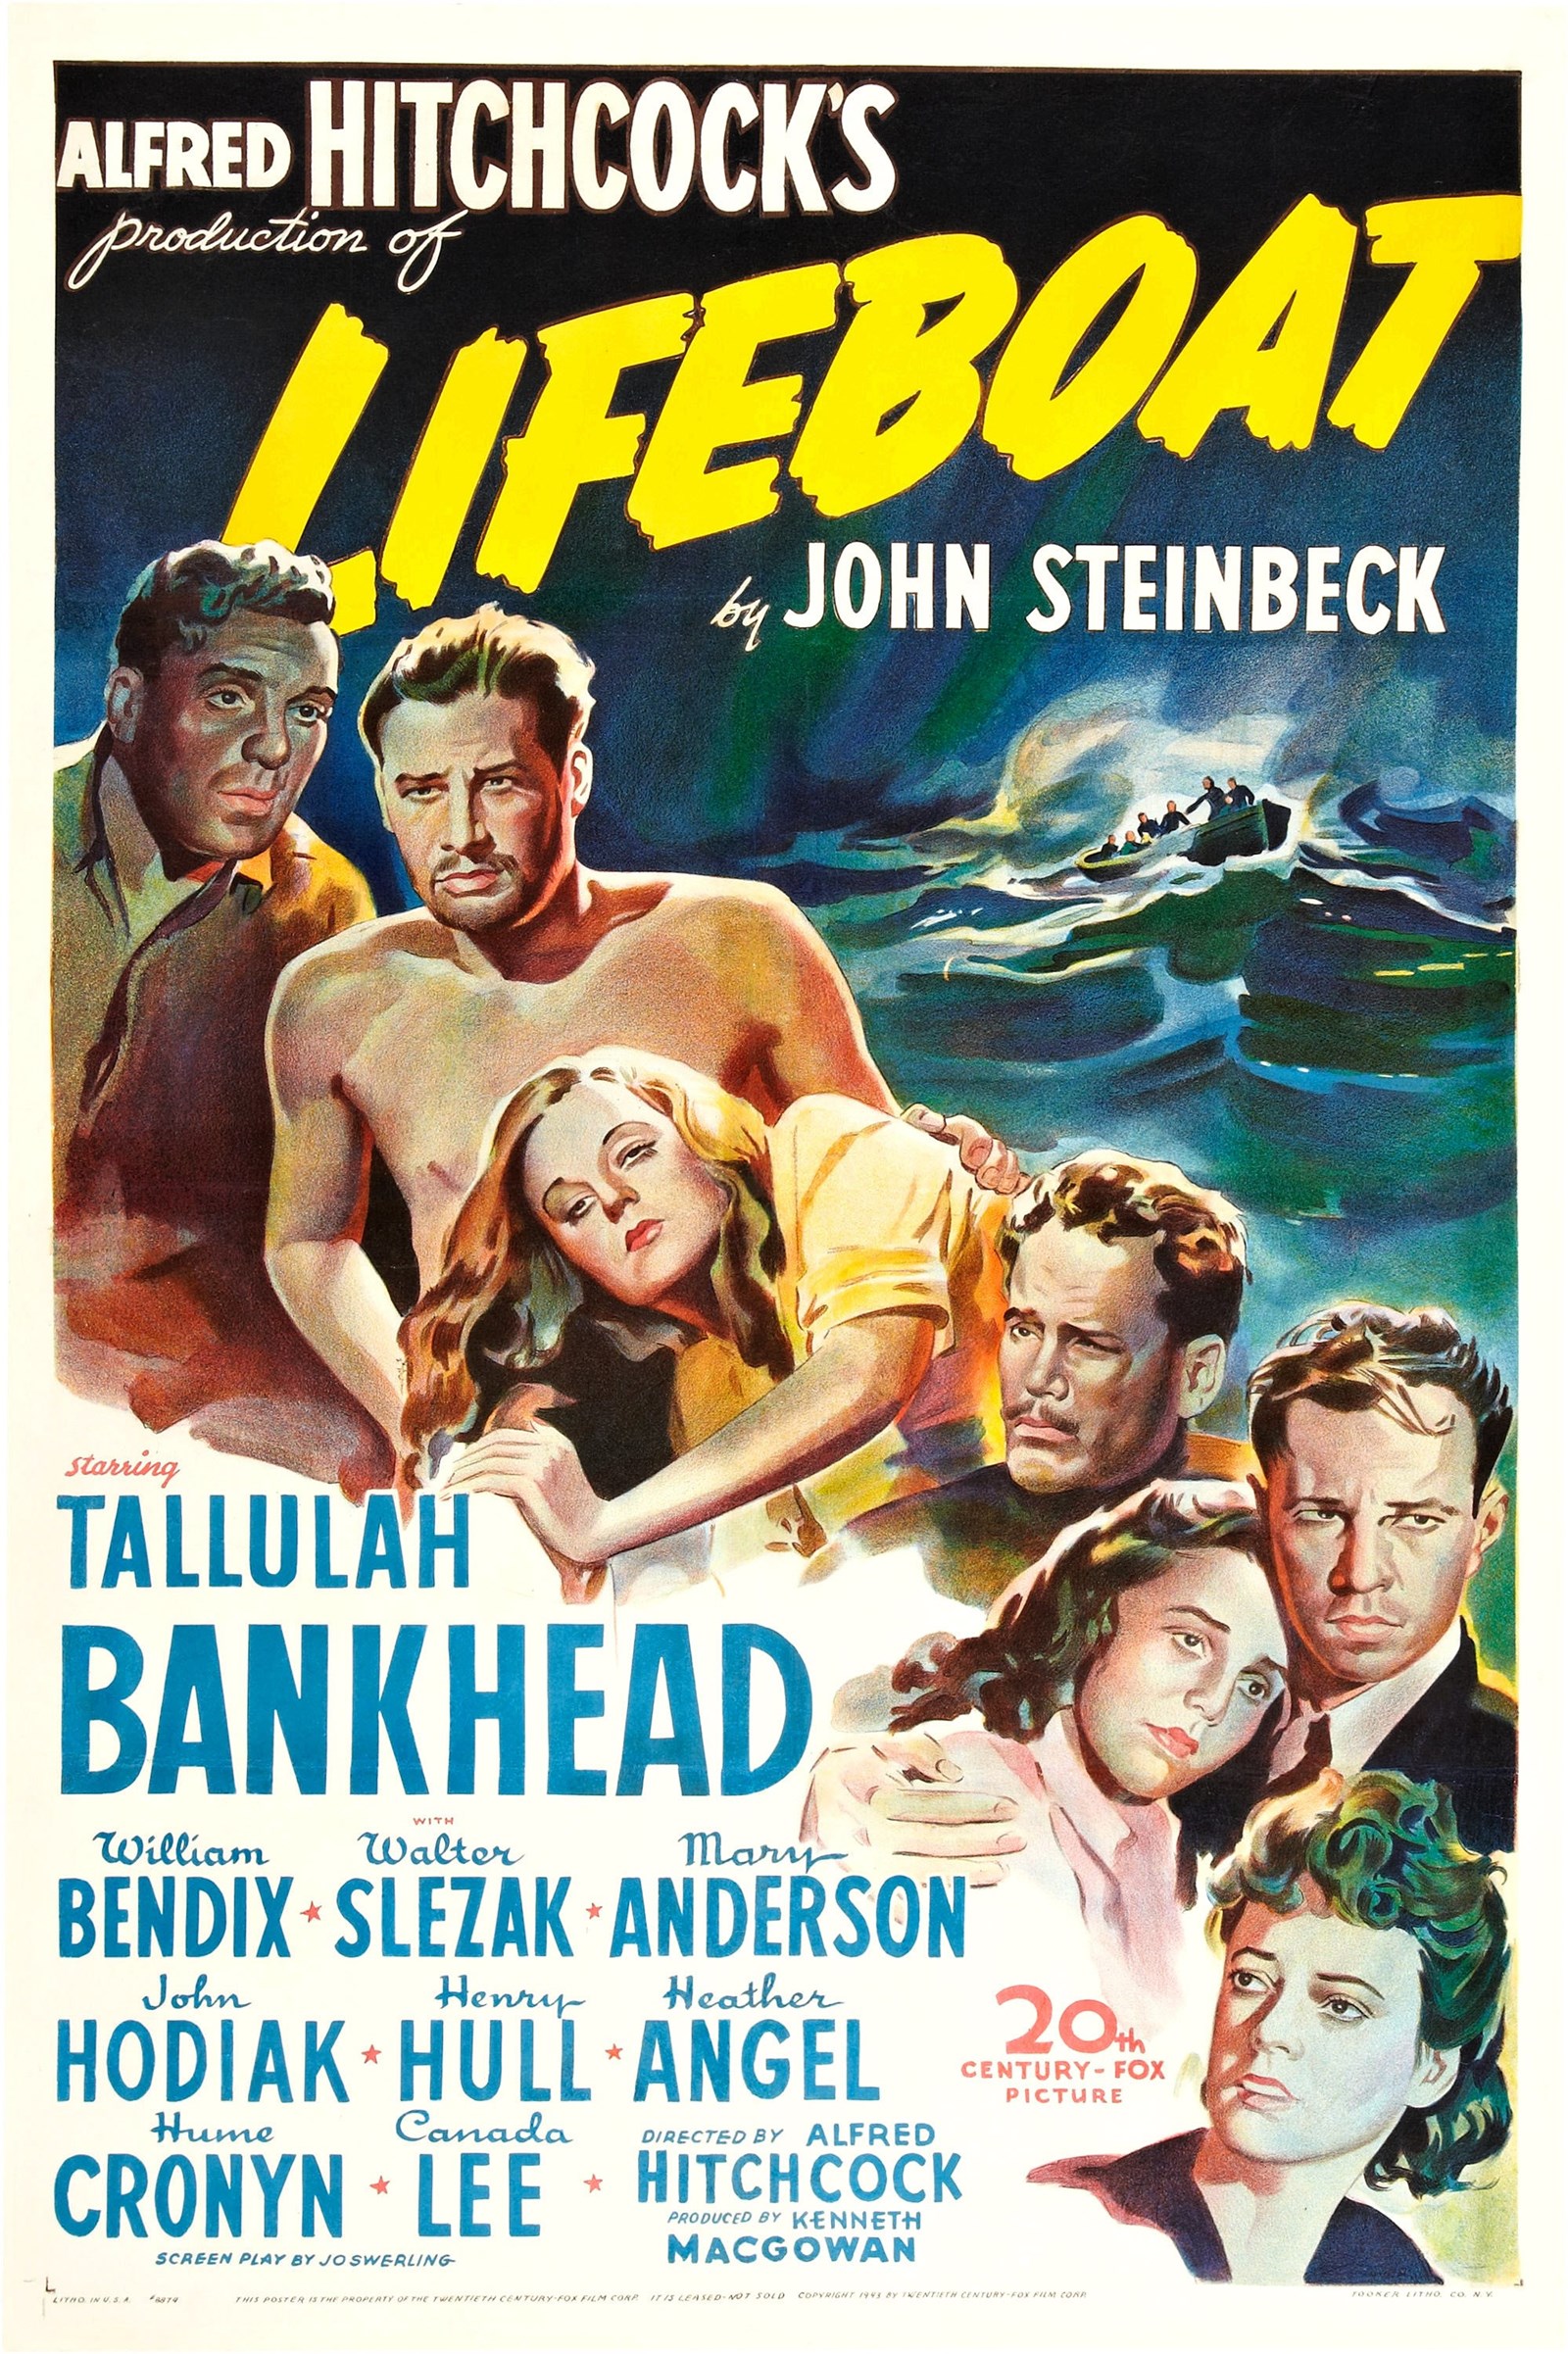 Poster for the movie Lifeboat